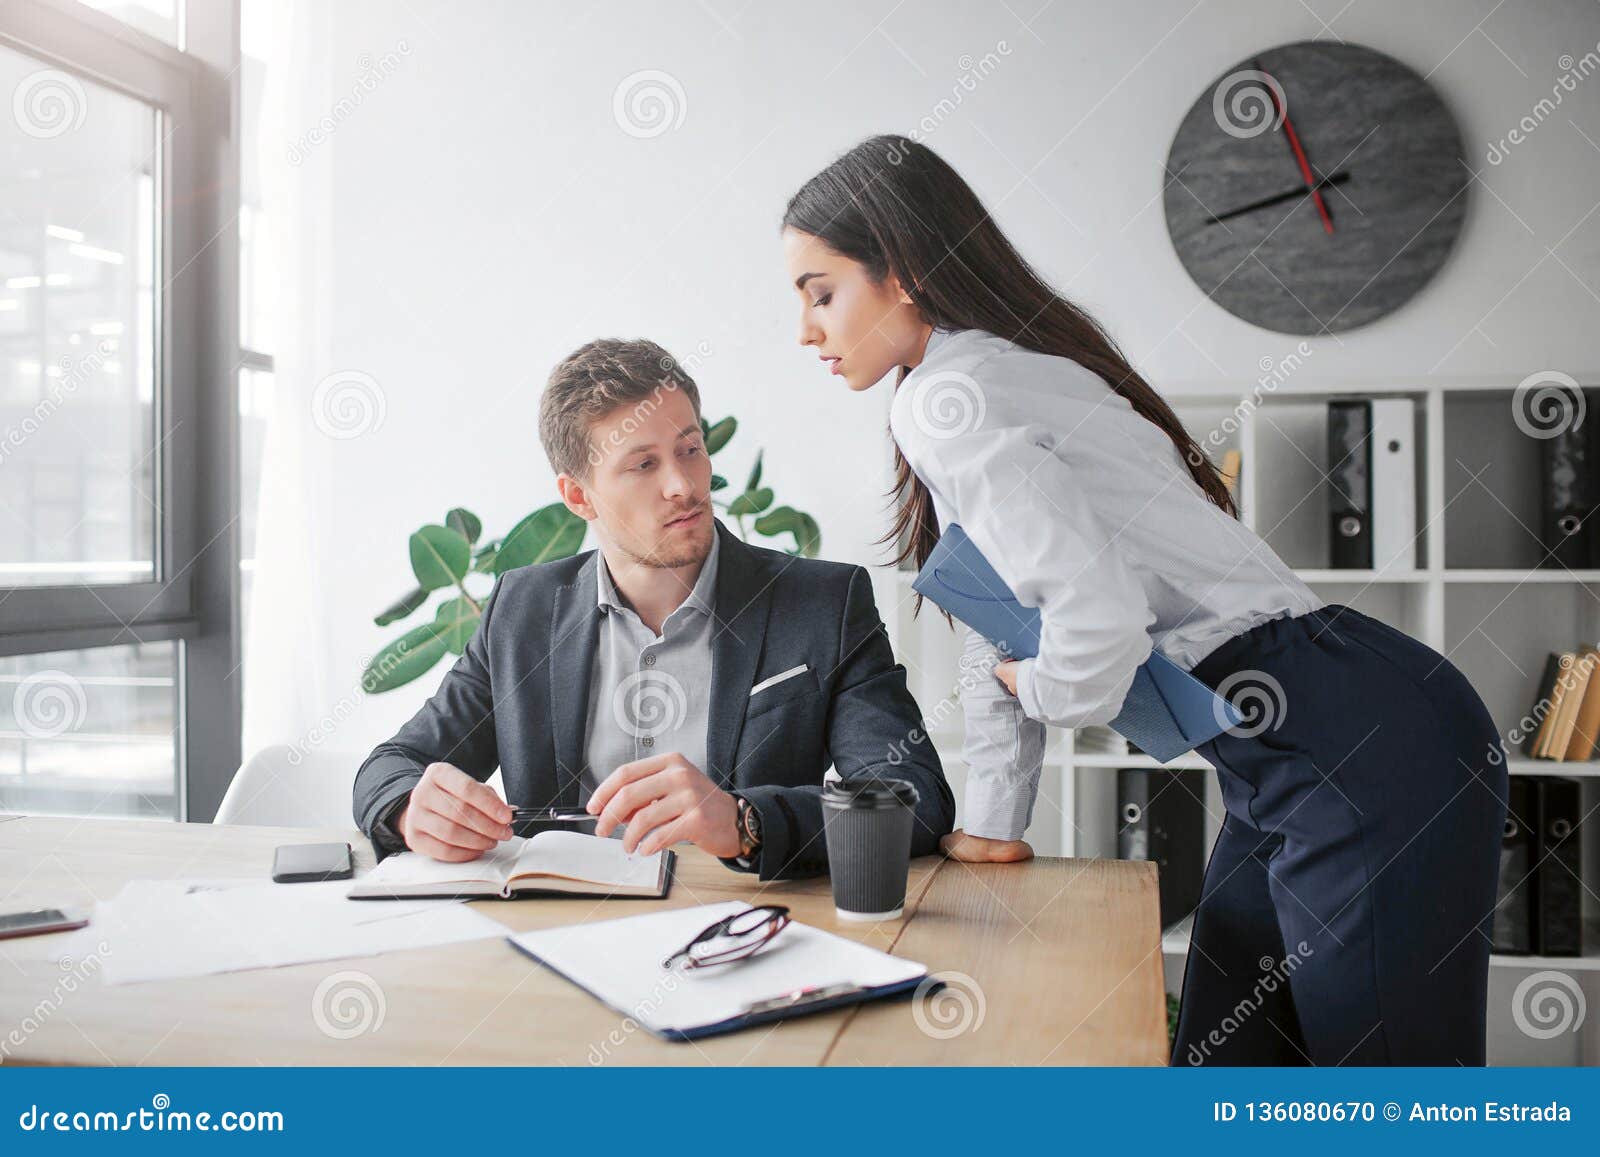 Sexual Young Woman Lean To Table. she Looks at Her Boss. Young Man